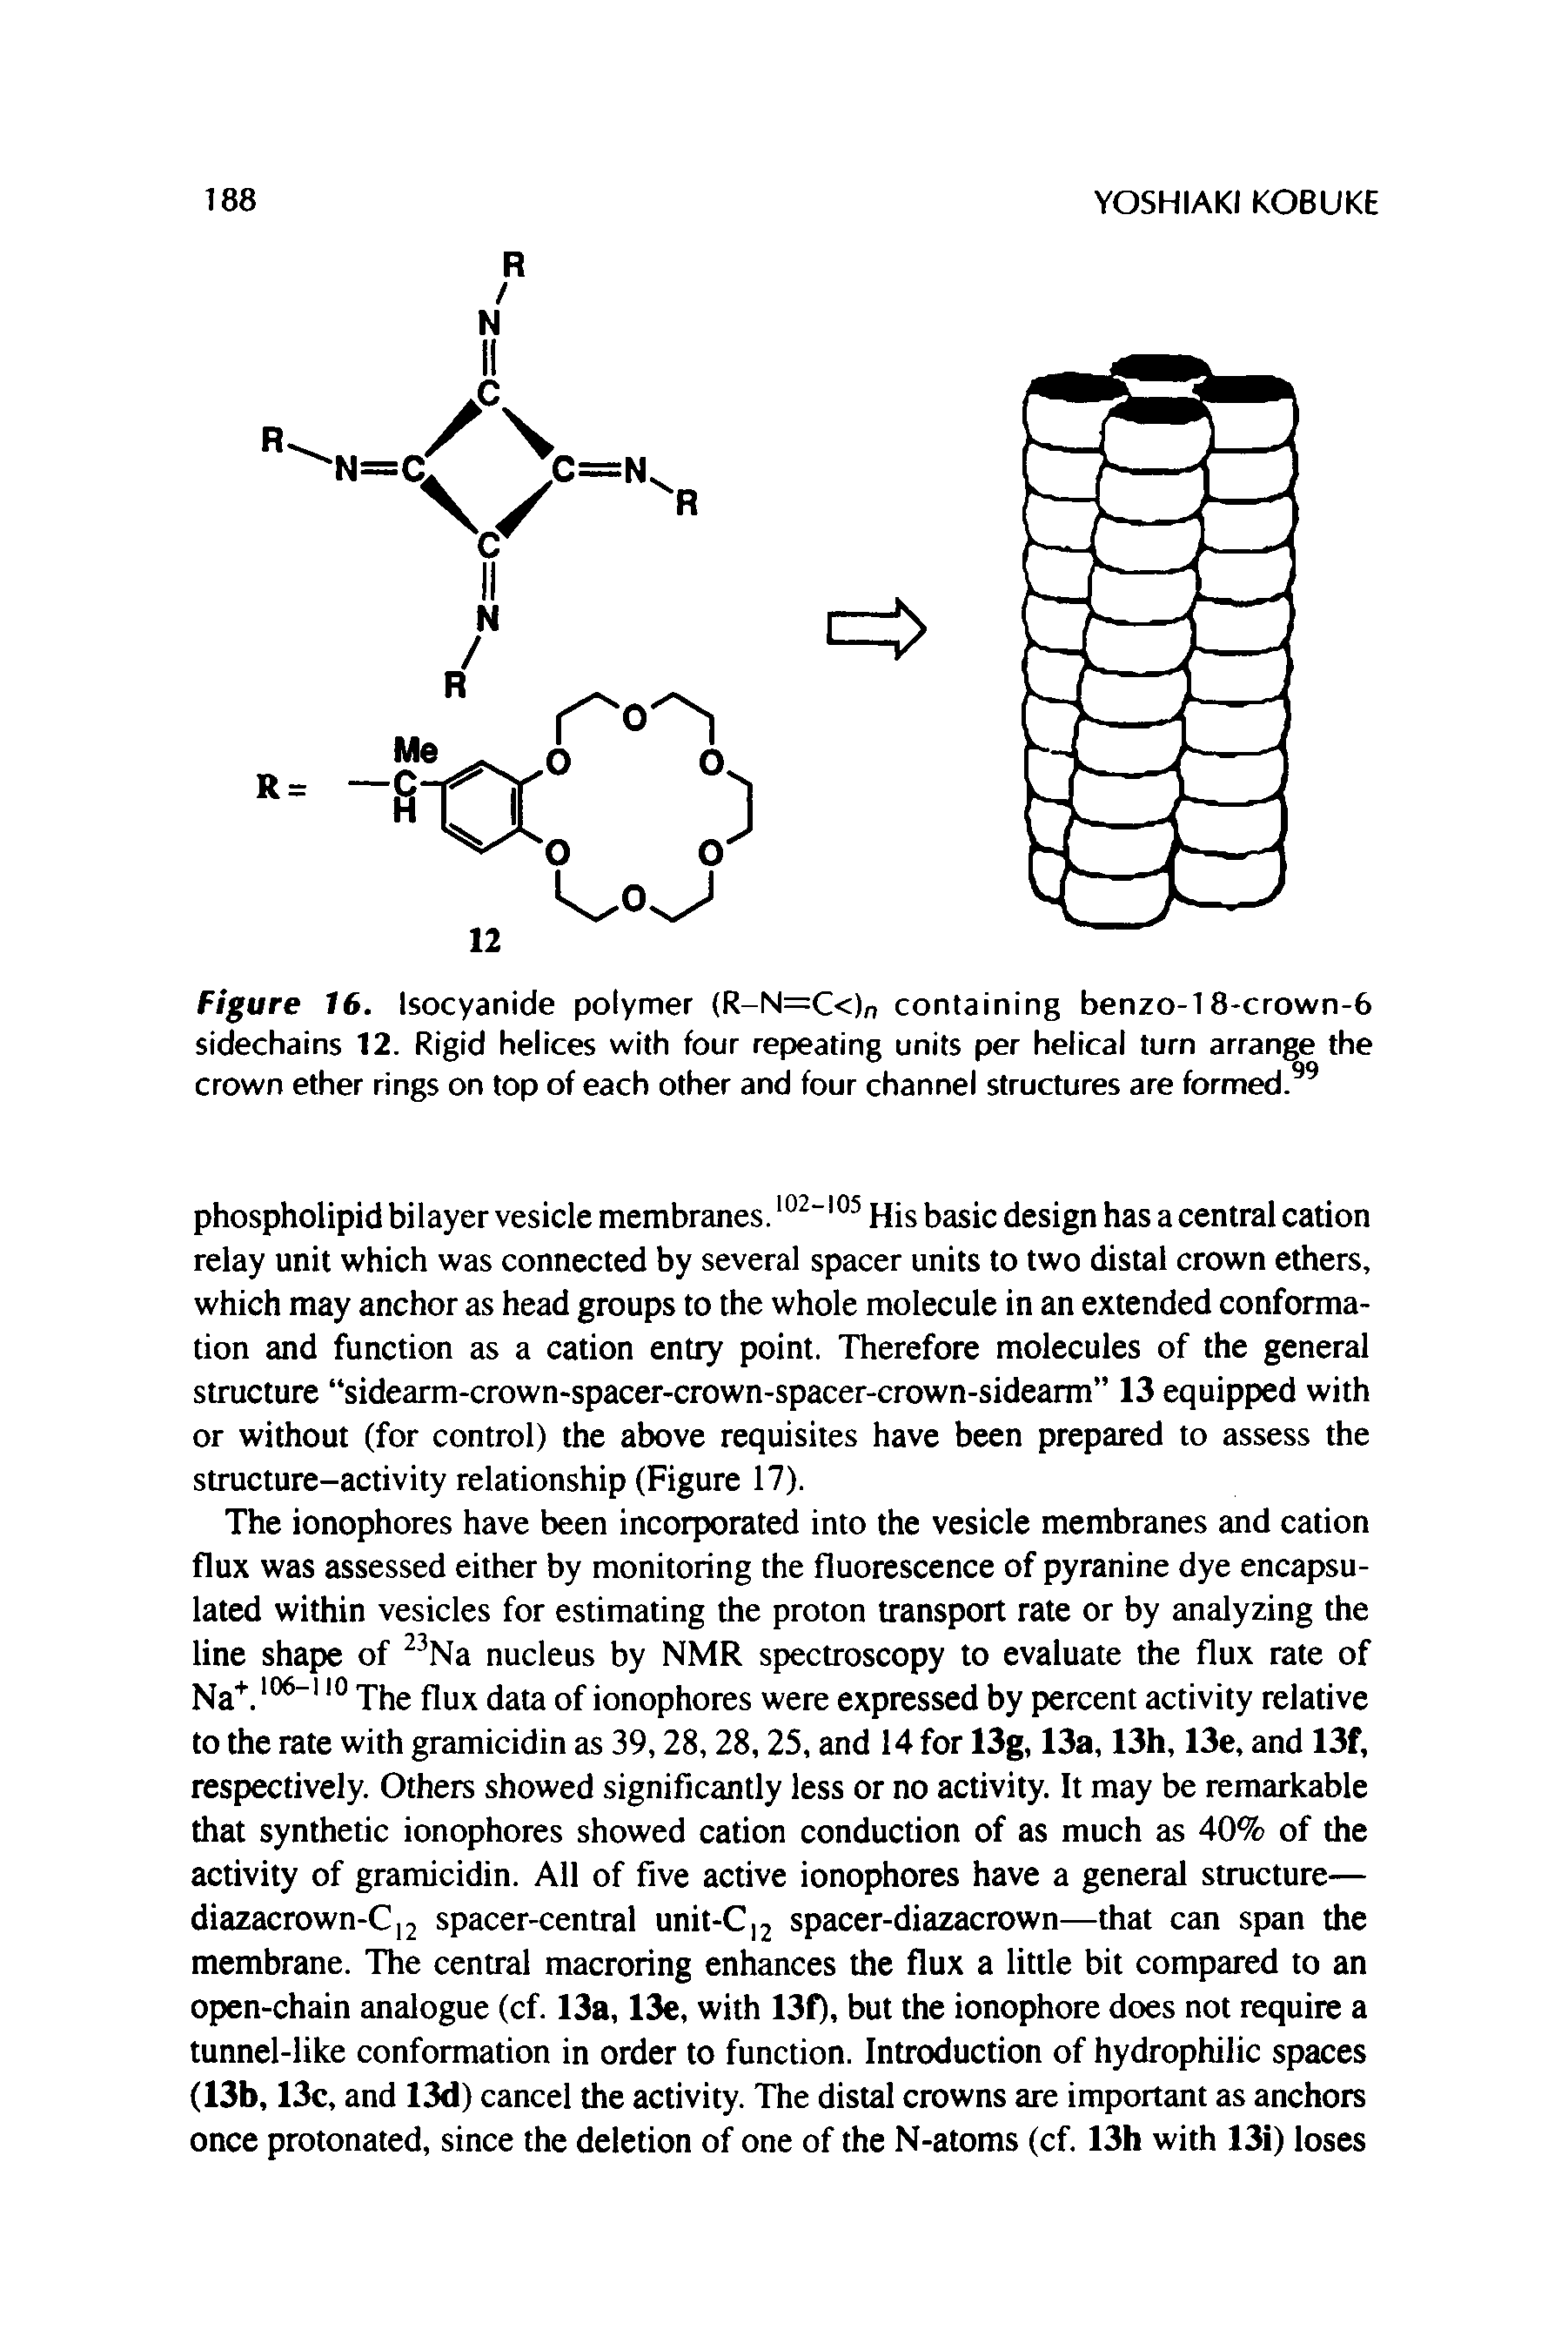 Figure 16. Isocyanide polymer (R-N=C<)n containing benzo-18-crown-6 sidechains 12. Rigid helices with four repeating units per helical turn arrange the crown ether rings on top of each other and four channel structures are formed. ...